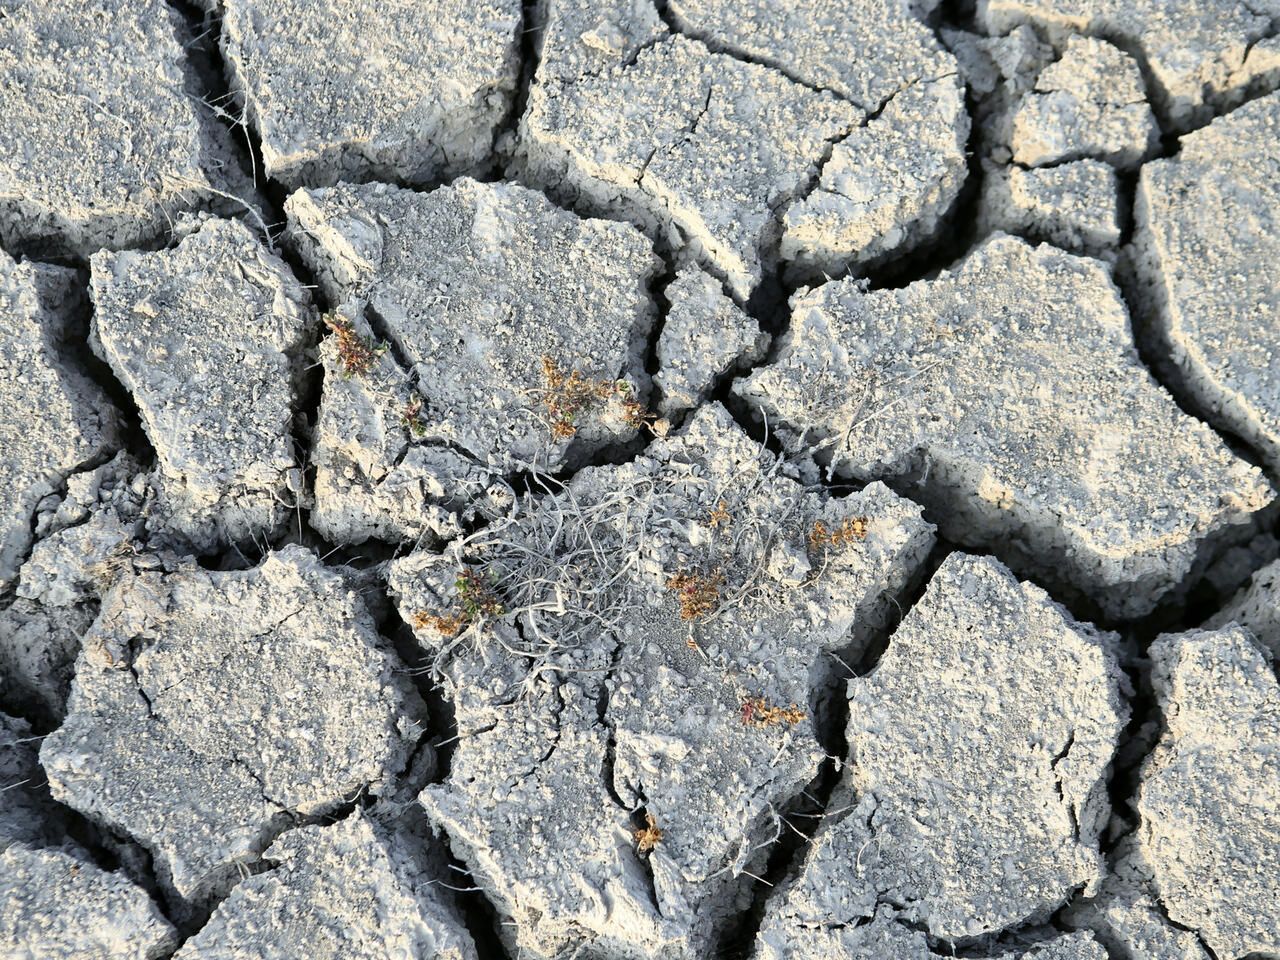 Europe faces worst drought in 500 years